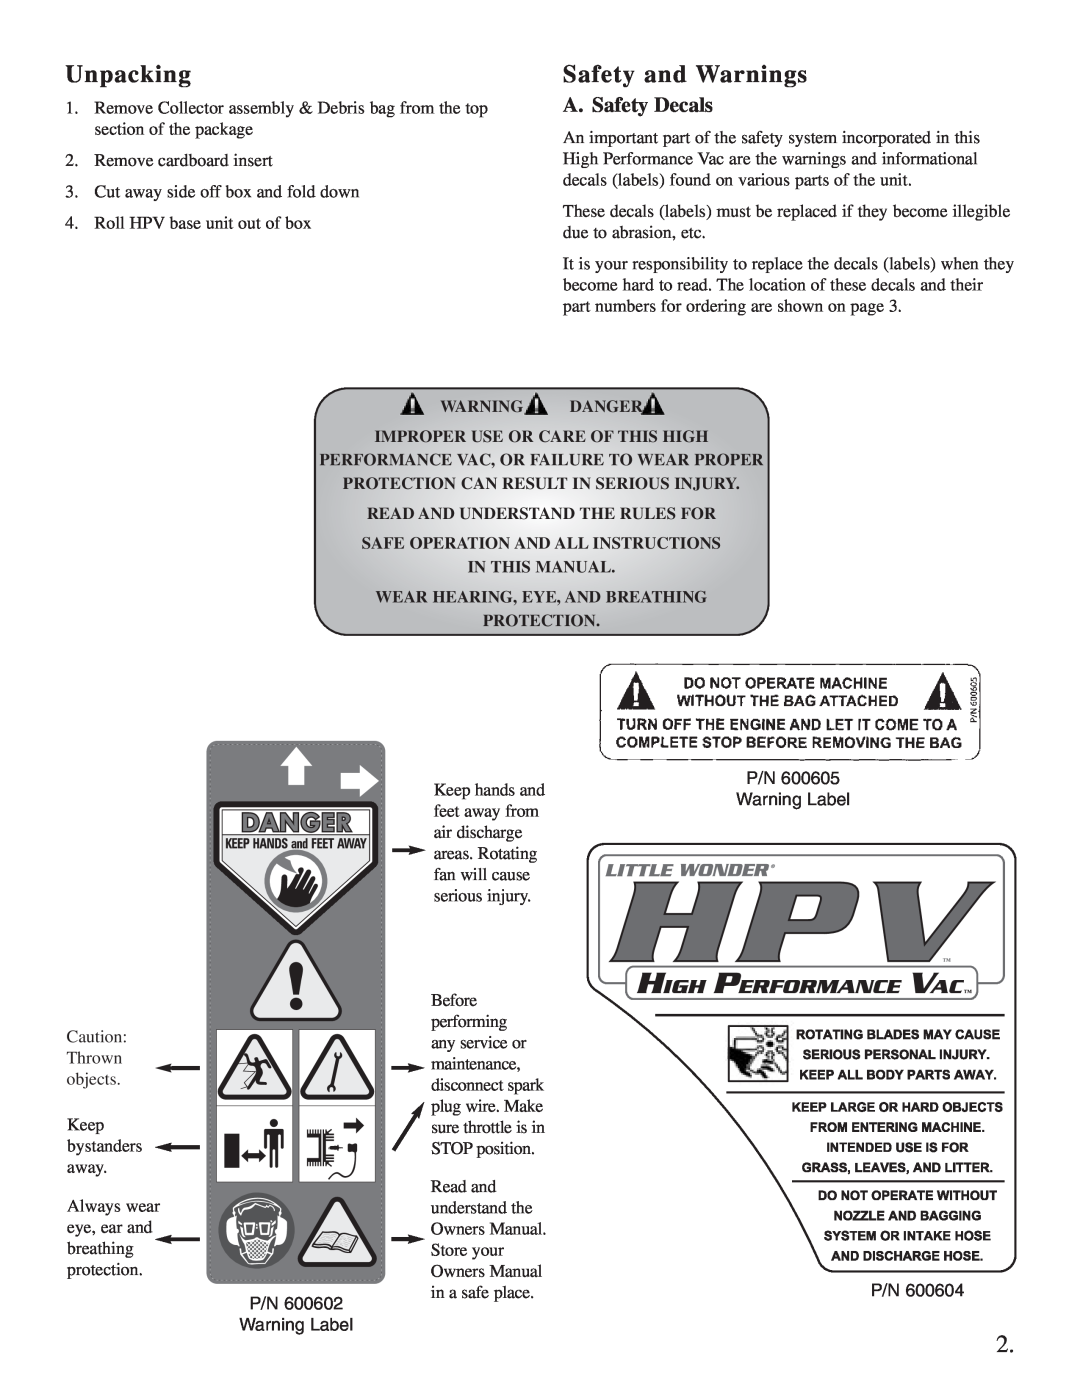 Little Wonder Little Wonder manual Unpacking, Safety and Warnings, A. Safety Decals 